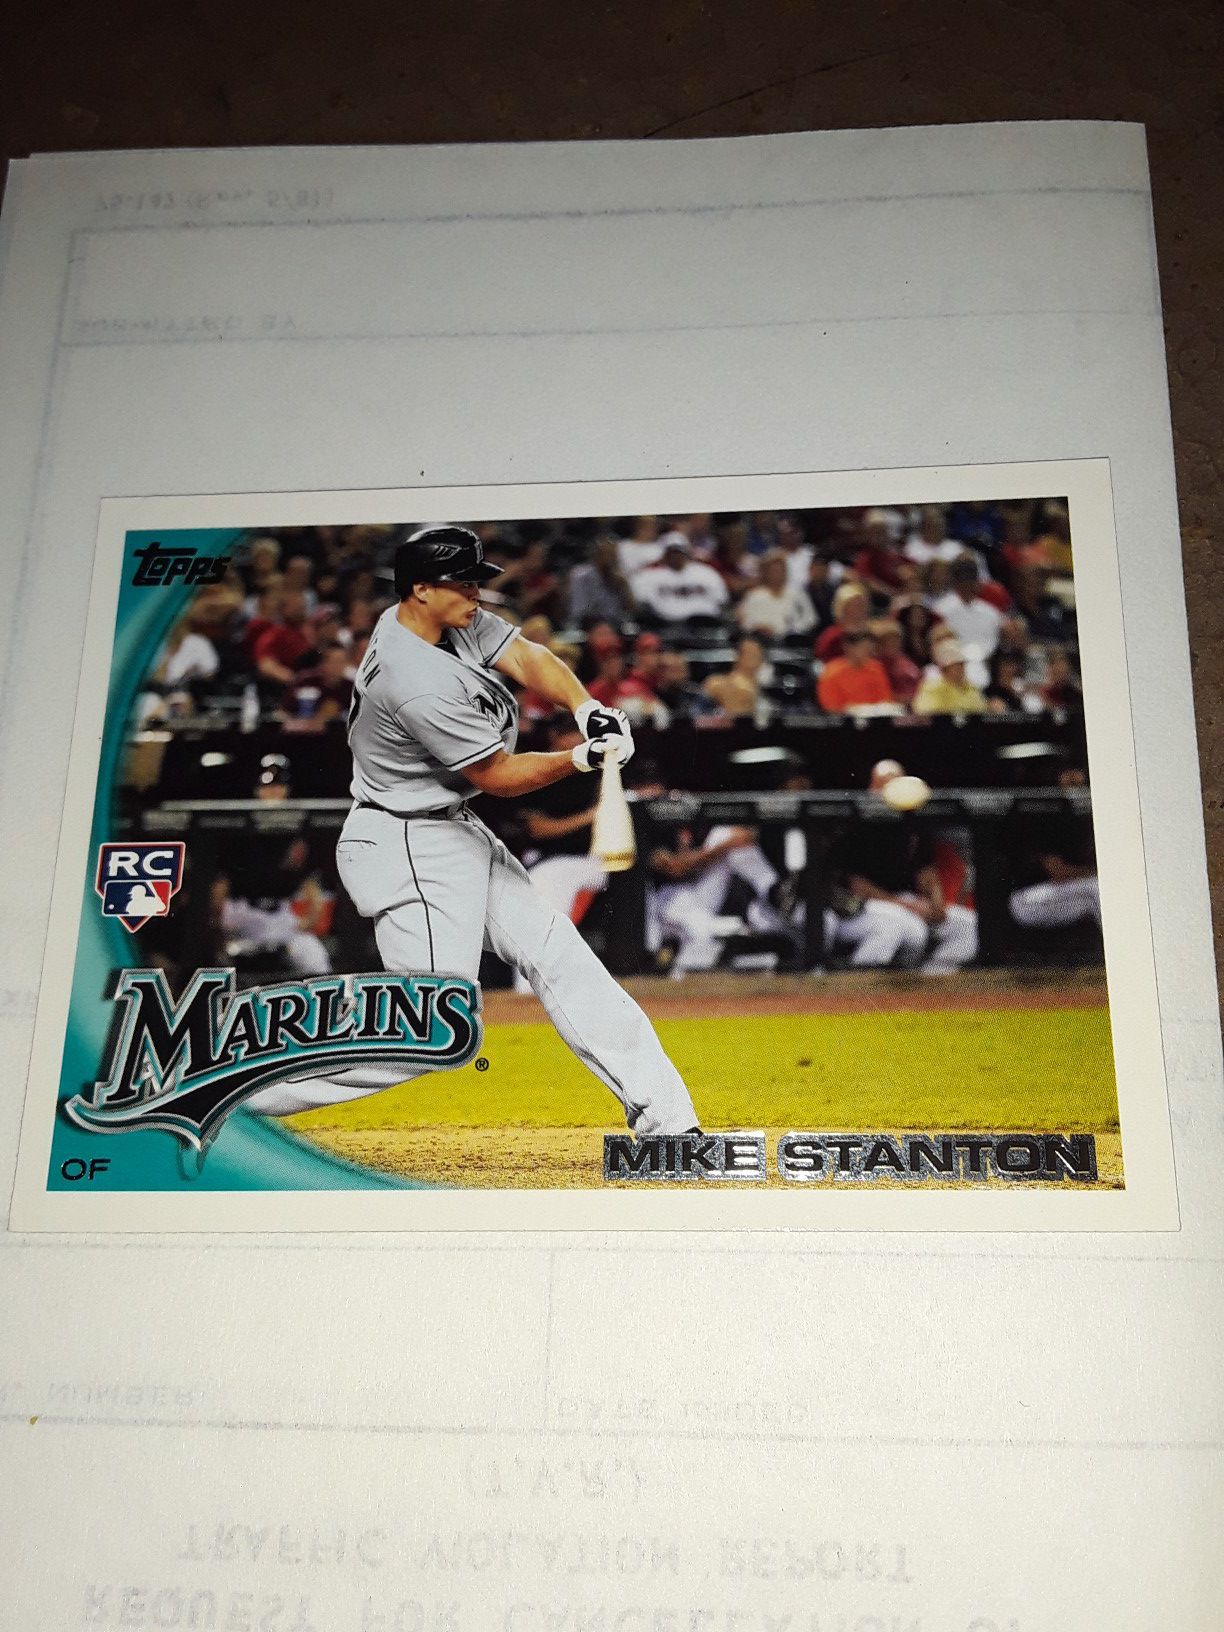 2010 Topps Update, Giancarlo Stanton rookie card.